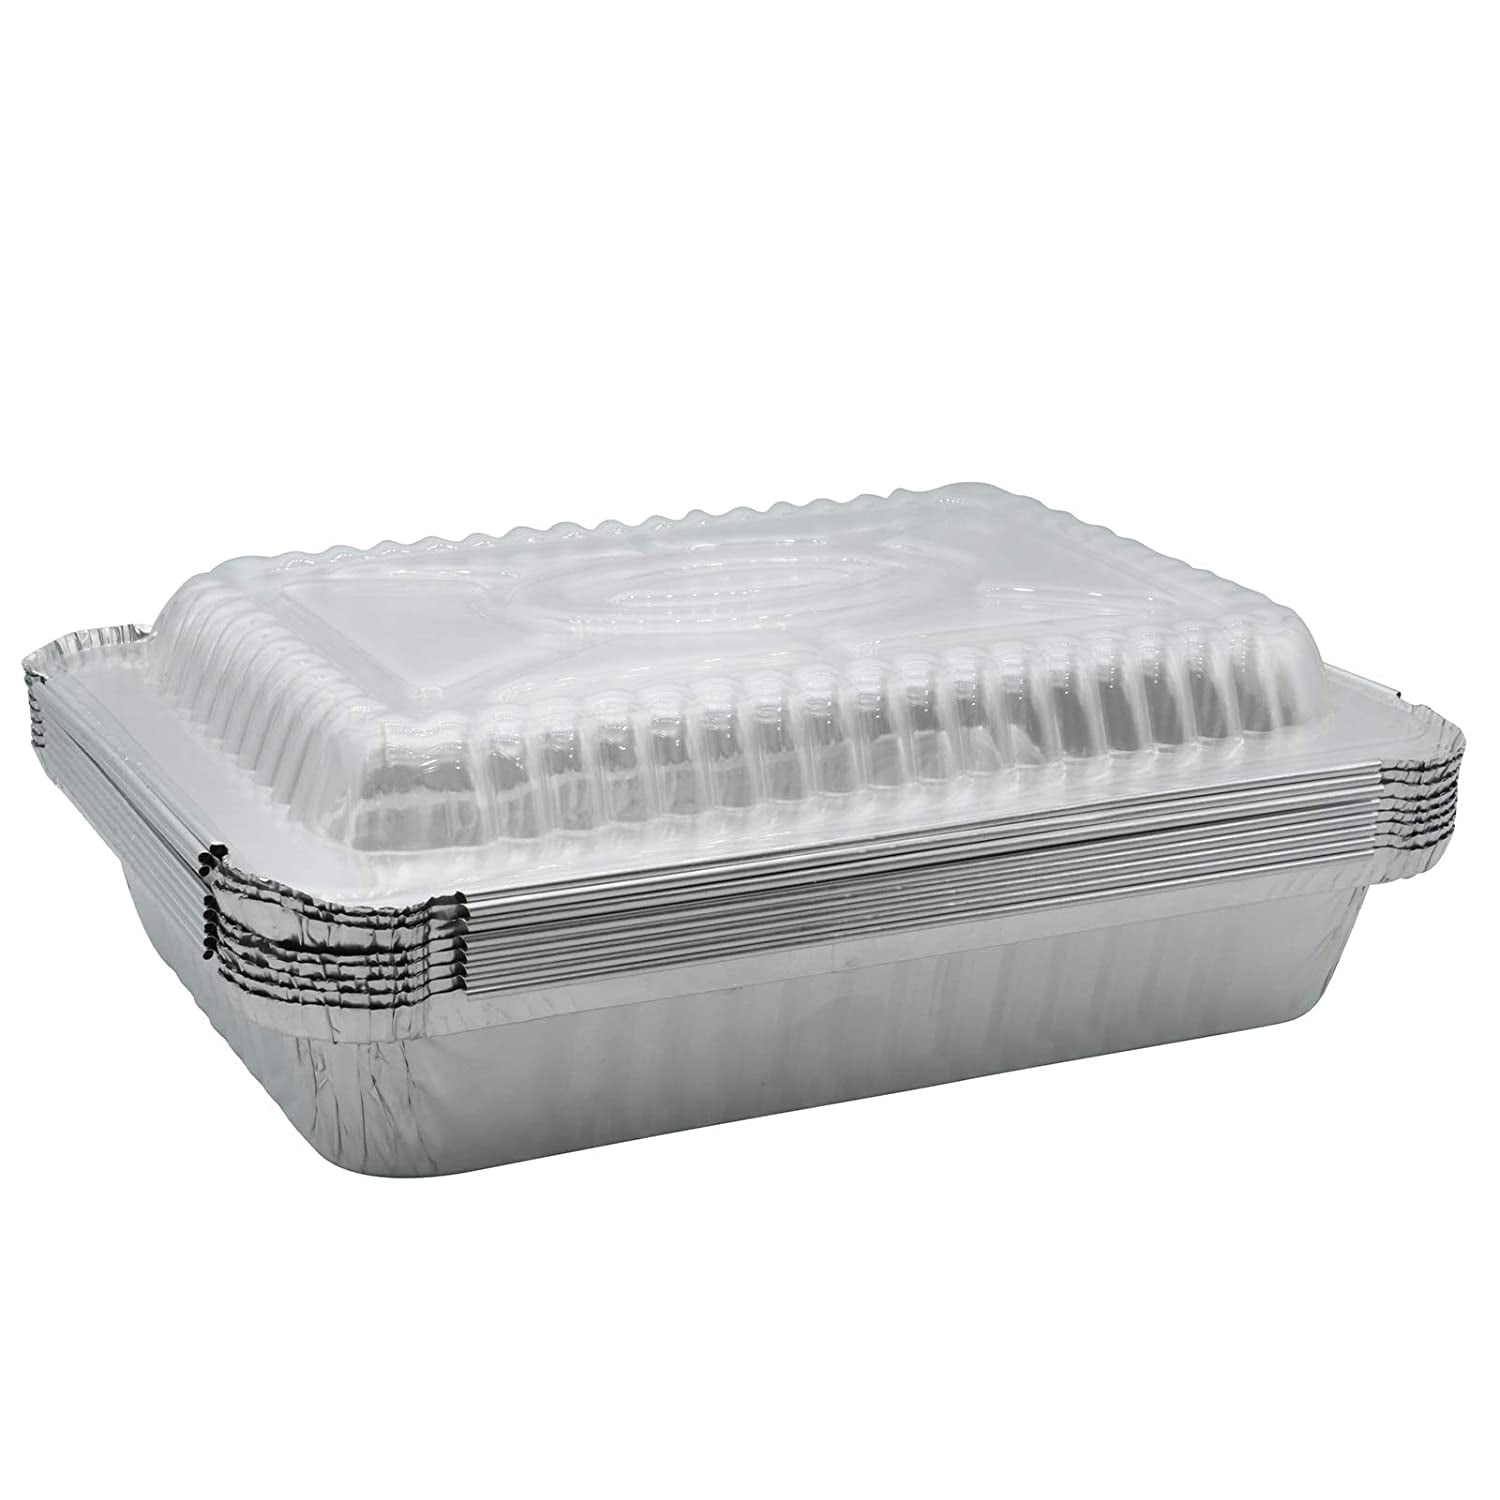 Aluminium Disposable Foil Food Container with Lids (Pack of 50) Reusable  Takeaway Containers, Great for Baking Roasting Cooking Food Storage, 14 x  12